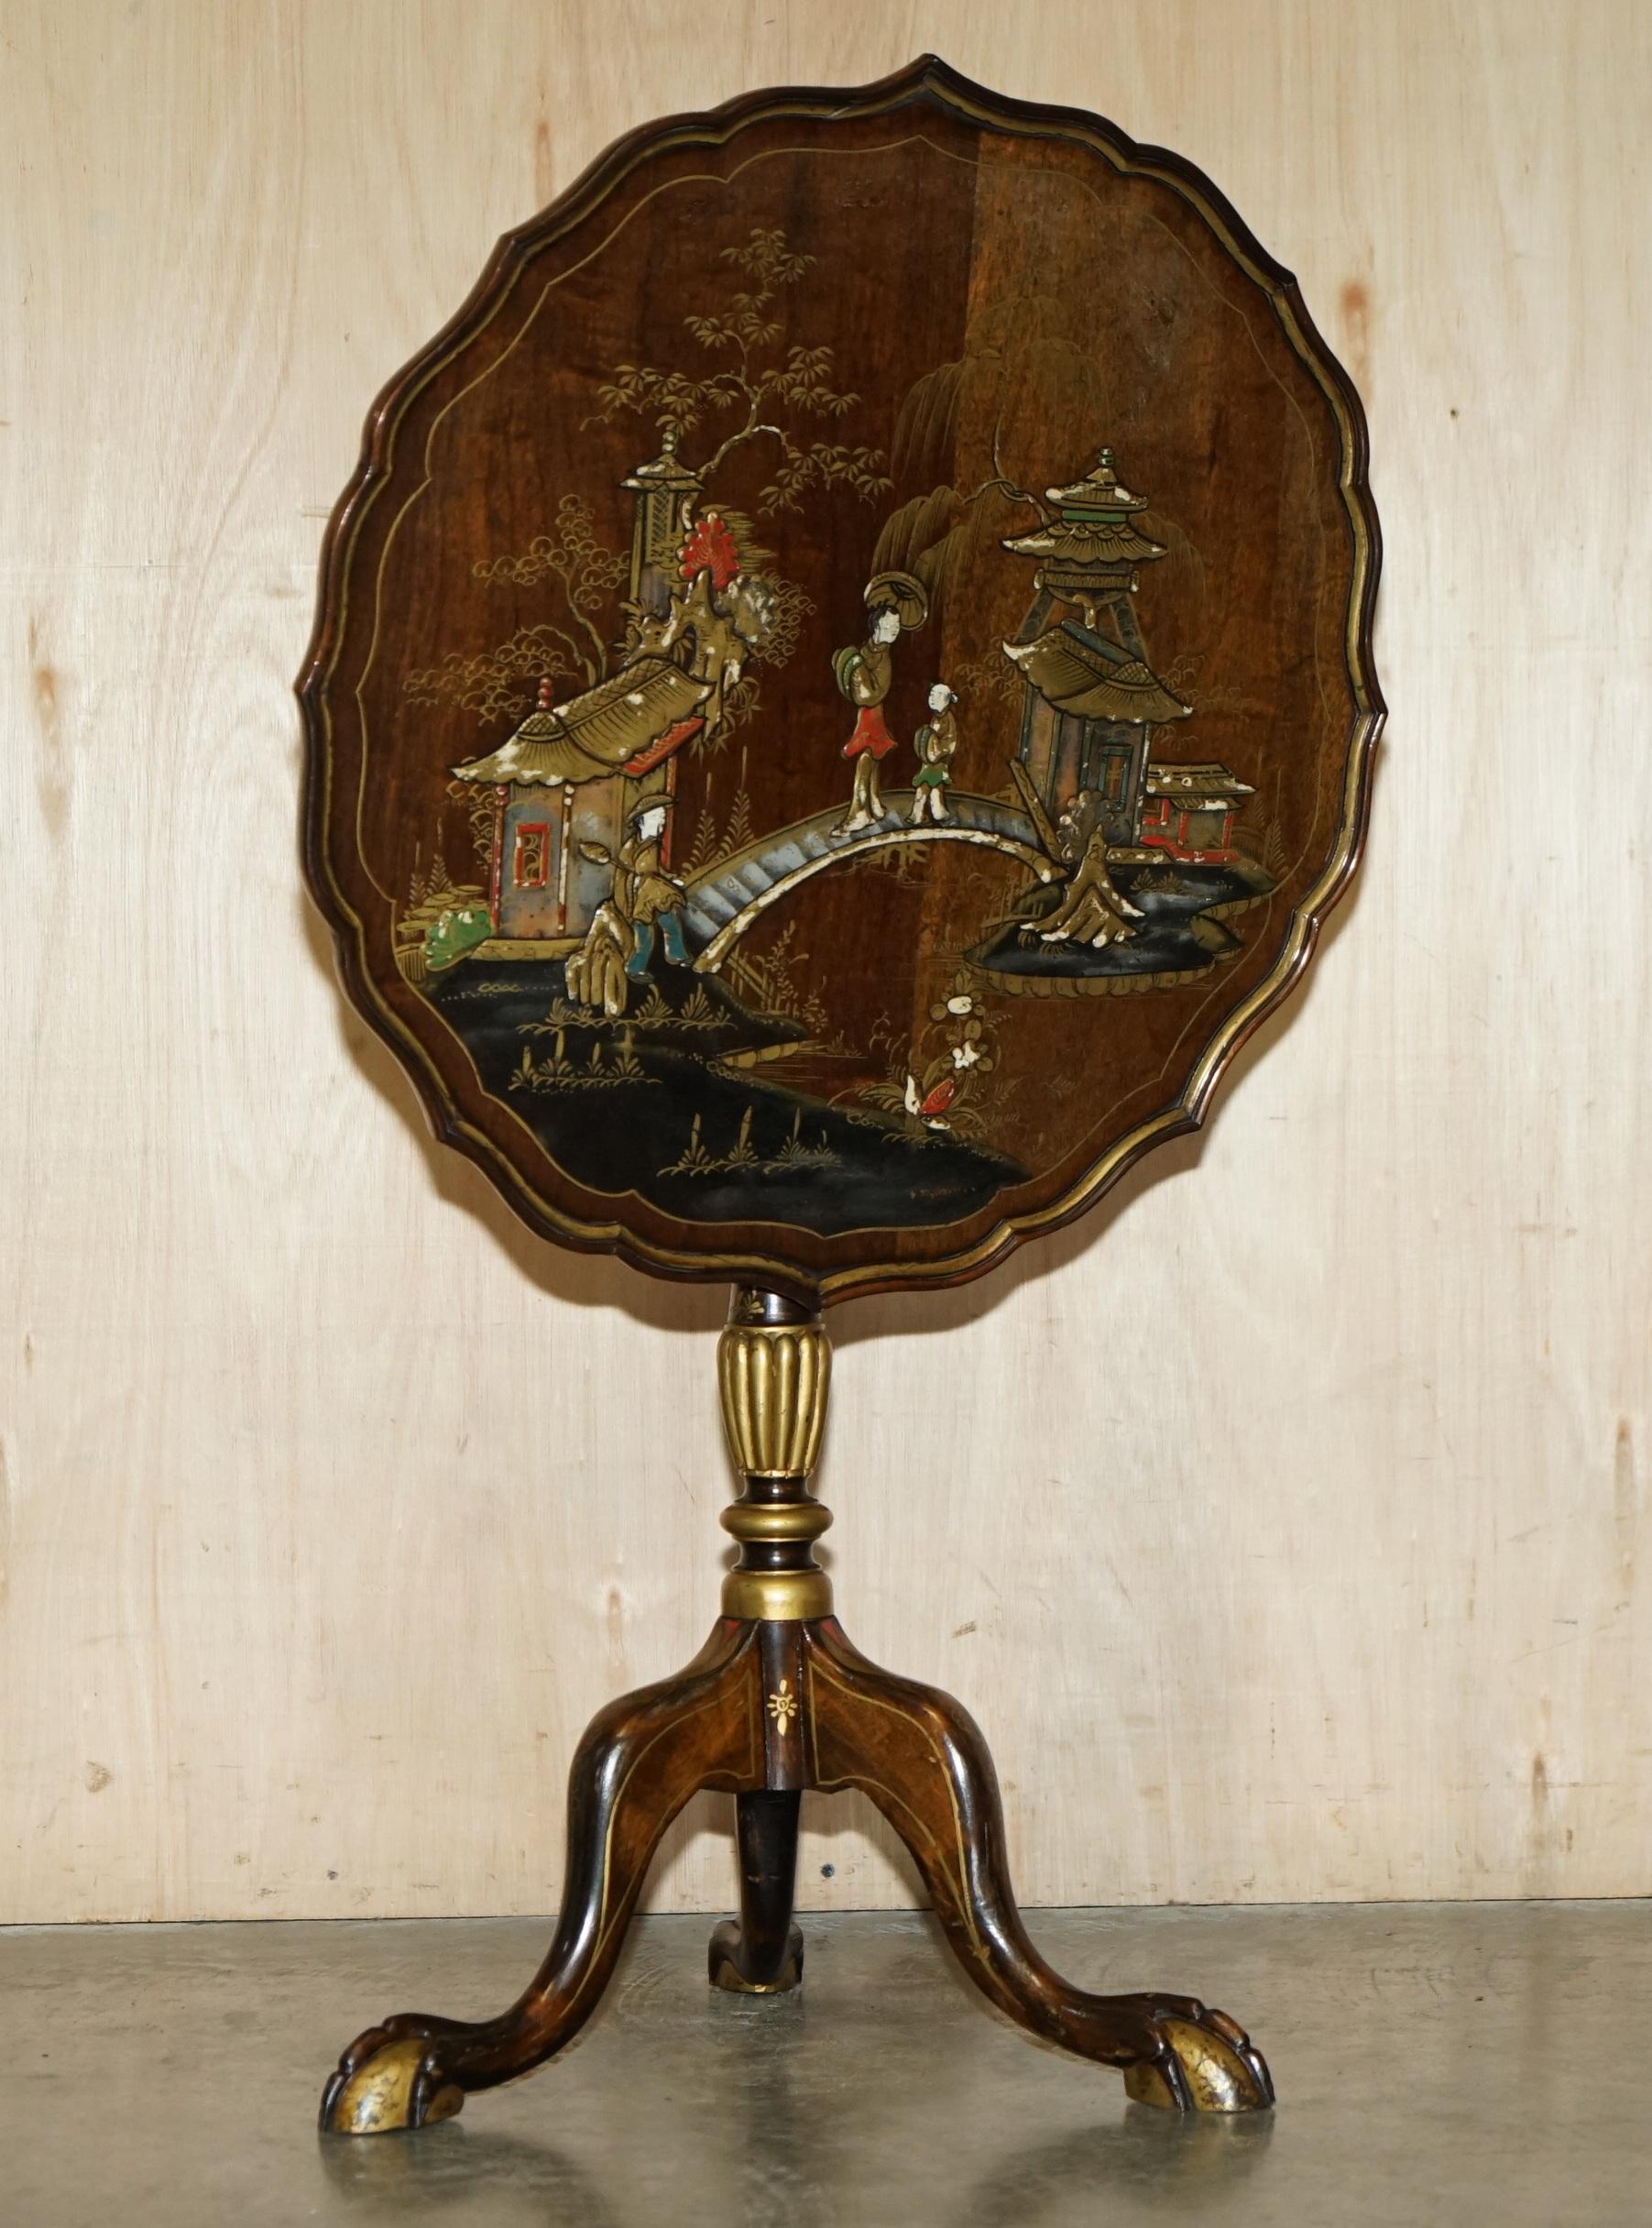 Royal House Antiques

Royal House Antiques is delighted to offer for sale this lovely circa 1880-1900 hand made Chinese Chinoiserie side end lamp table with tilt top feature 

Please note the delivery fee listed is just a guide, it covers within the